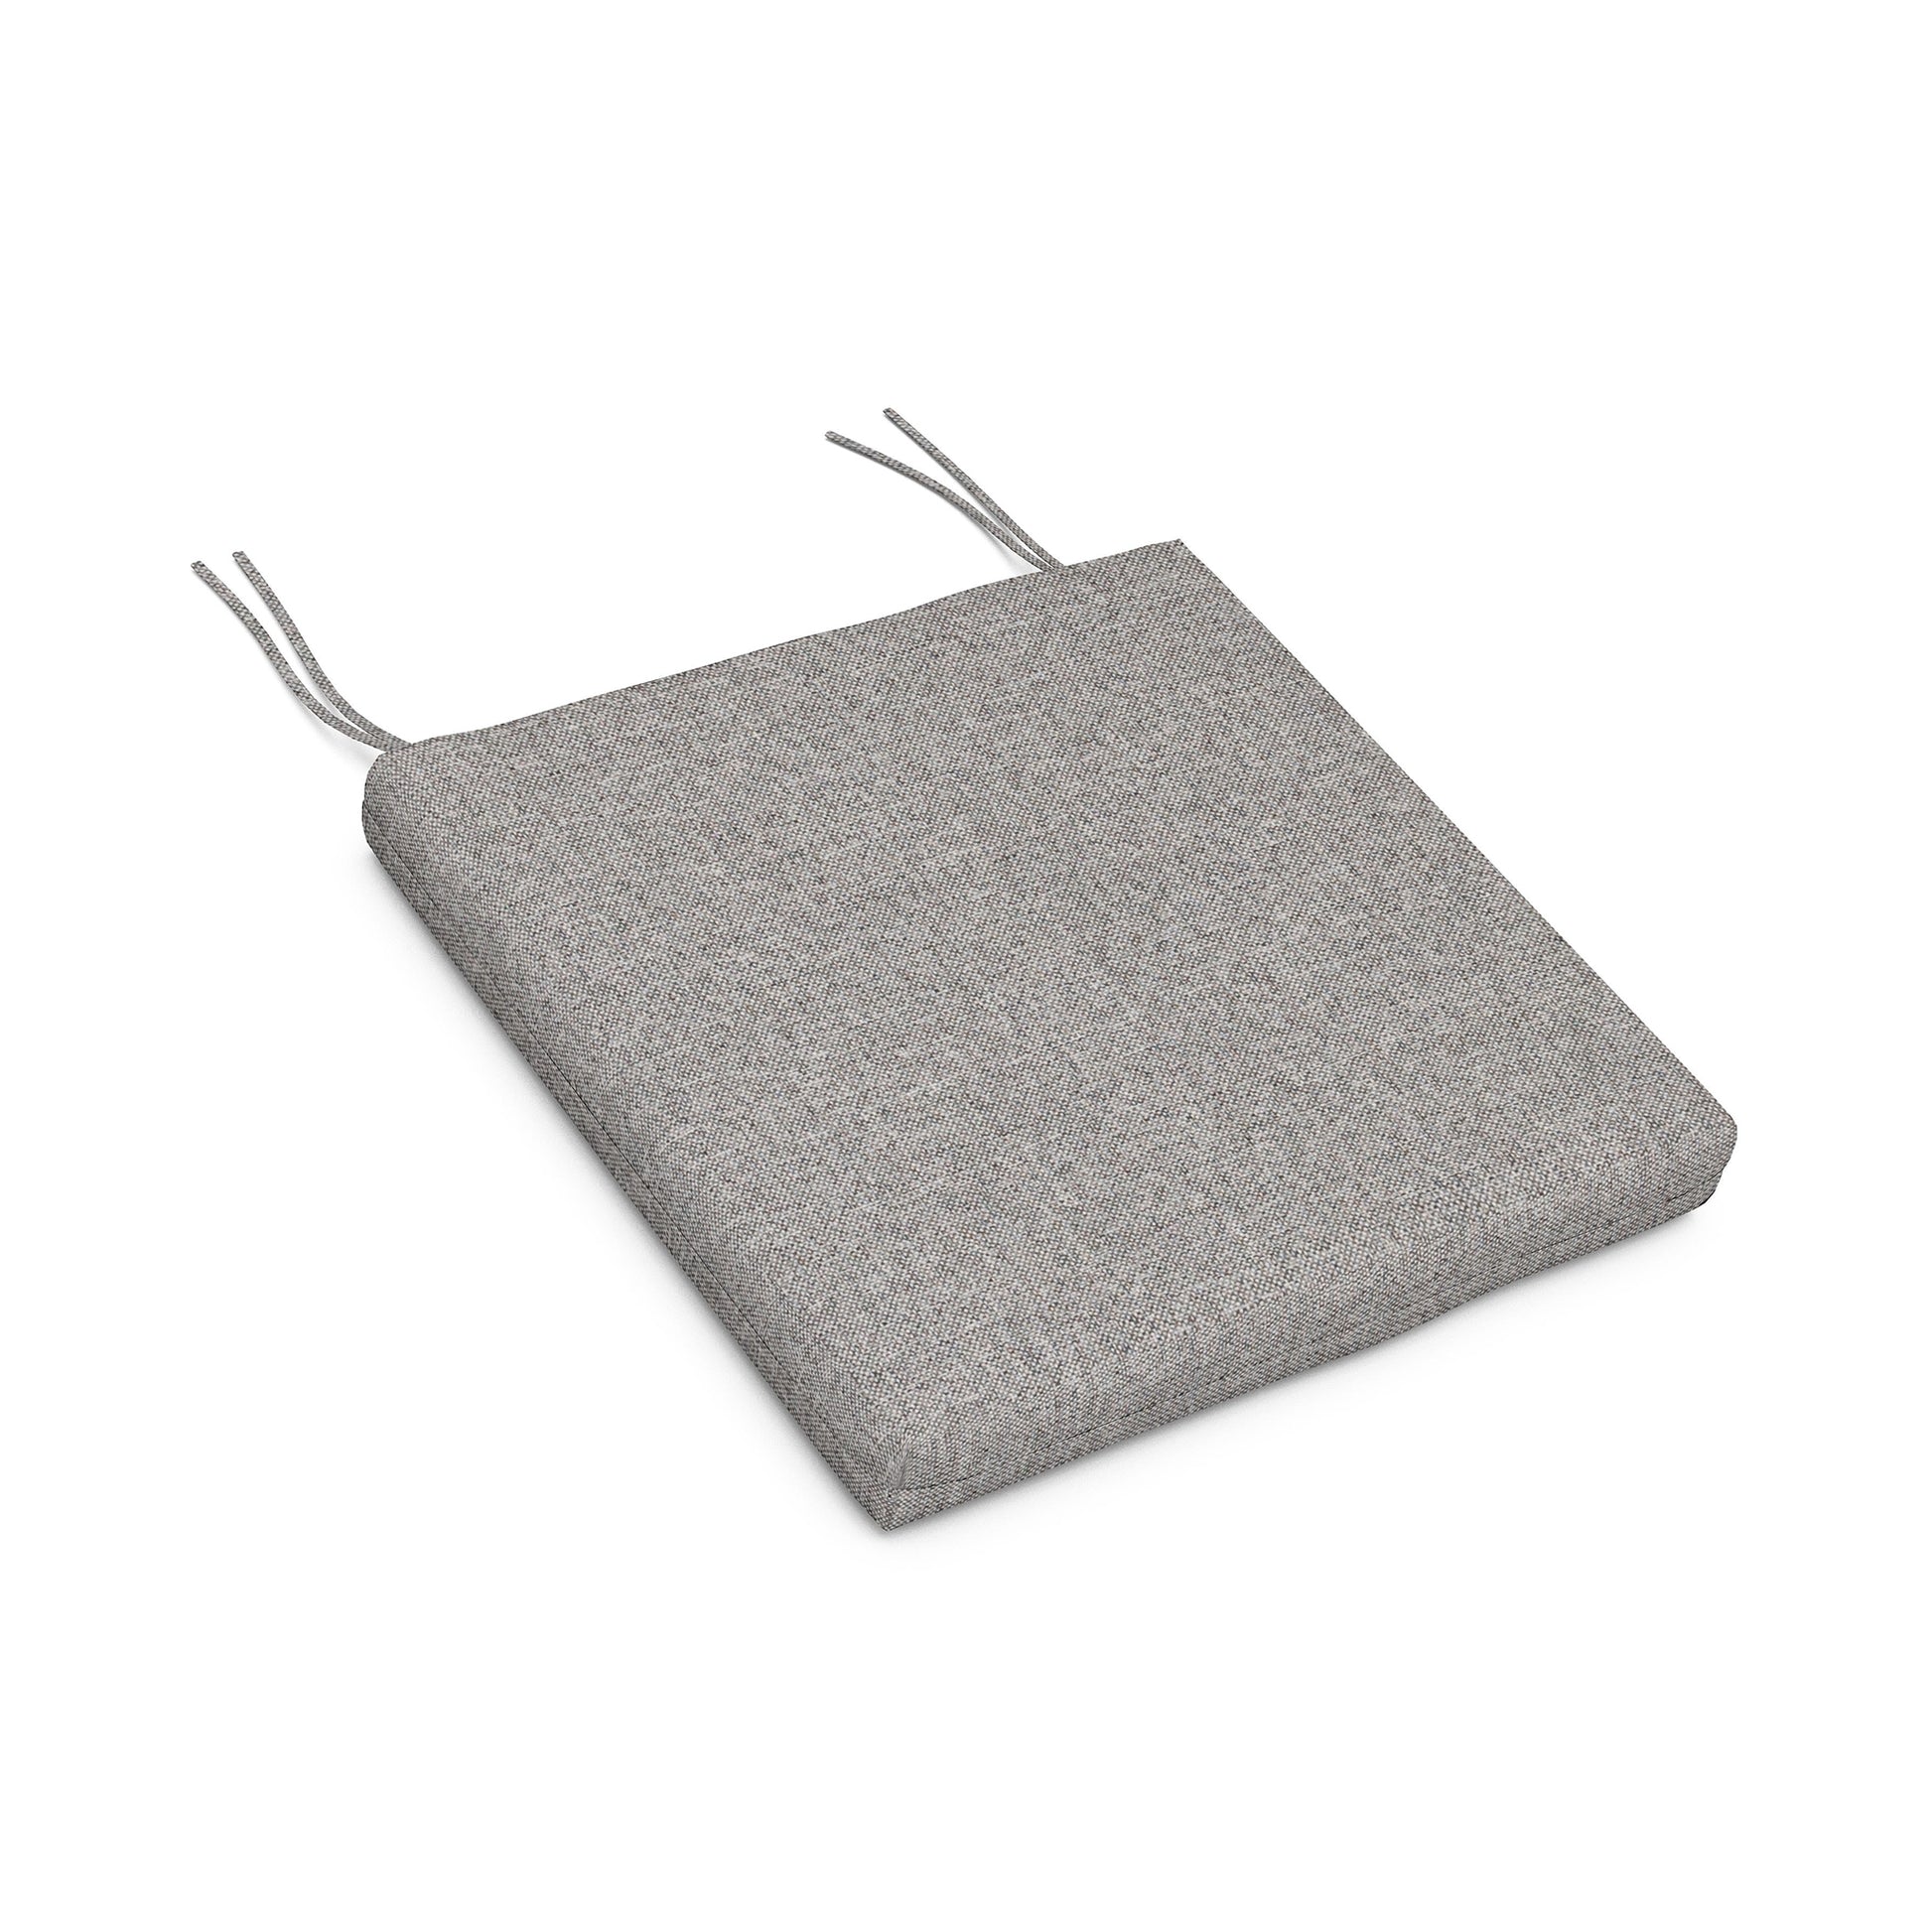 Gray square POLYWOOD seat cushion with weather-resistant upholstery fabric and two protruding metal wires, isolated on a white background.